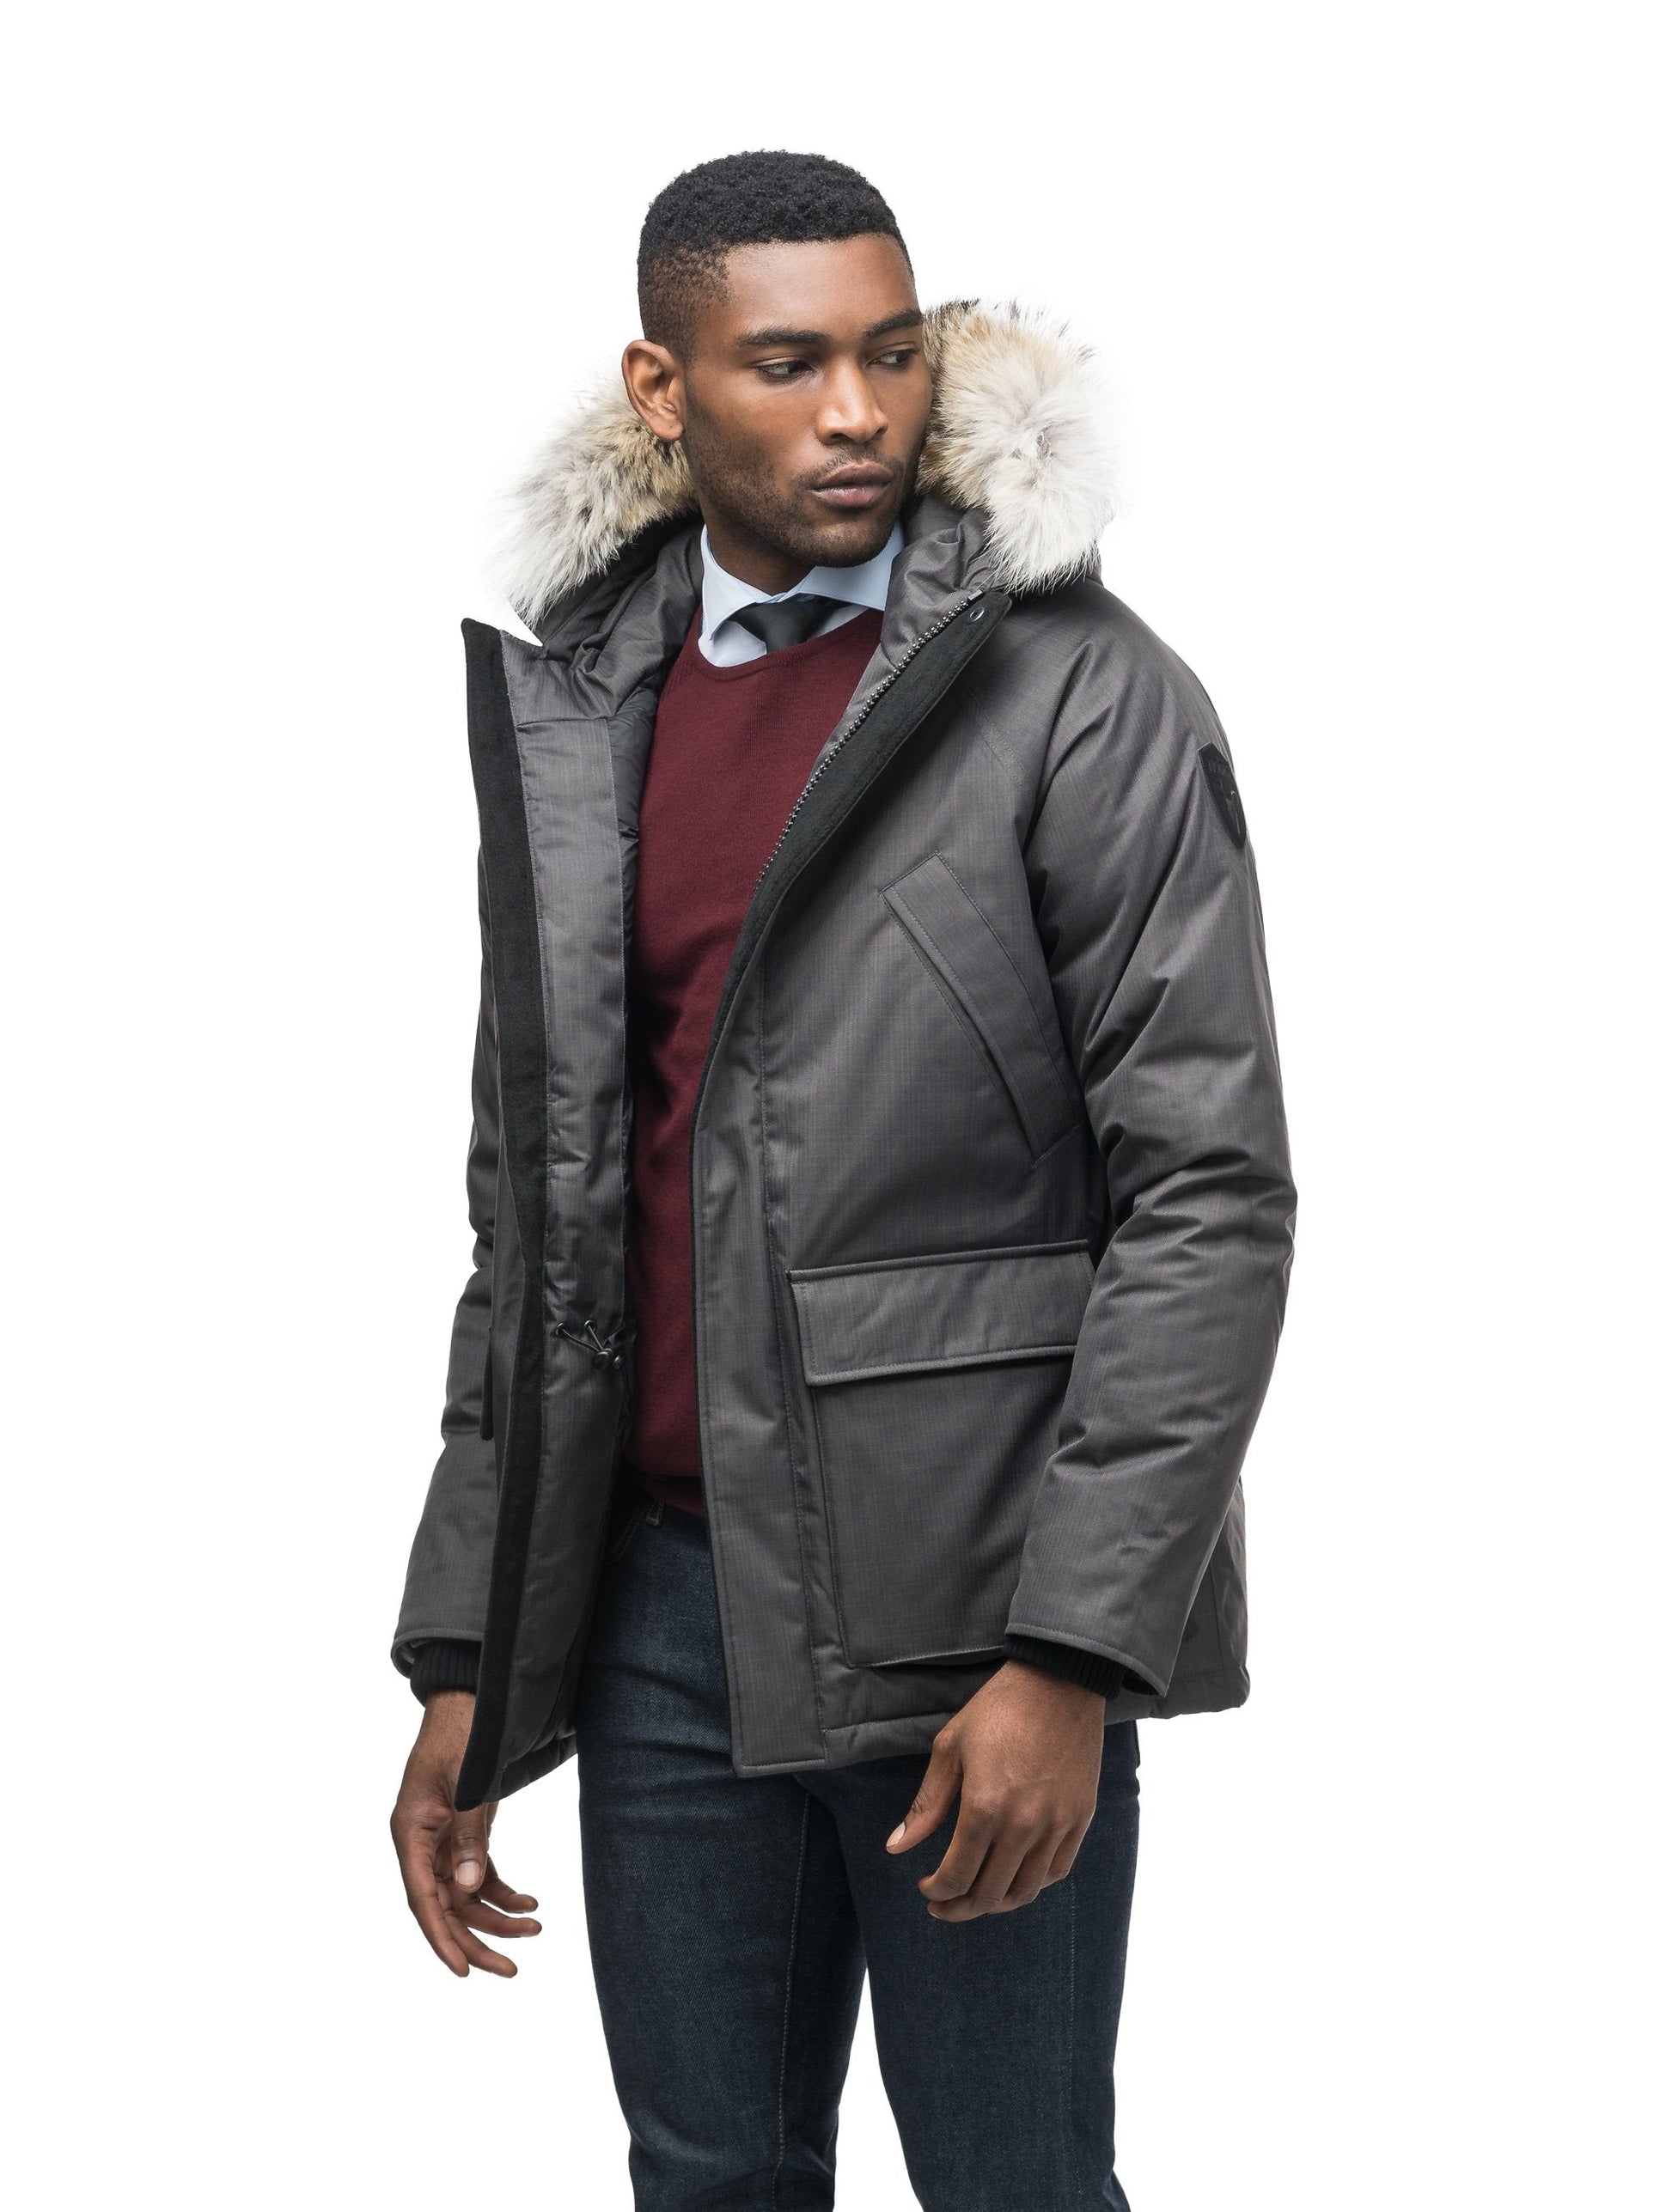 Men's waist length down filled jacket with two front pockets with magnetic closure and a removable fur trim on the hood in CH Steel Grey